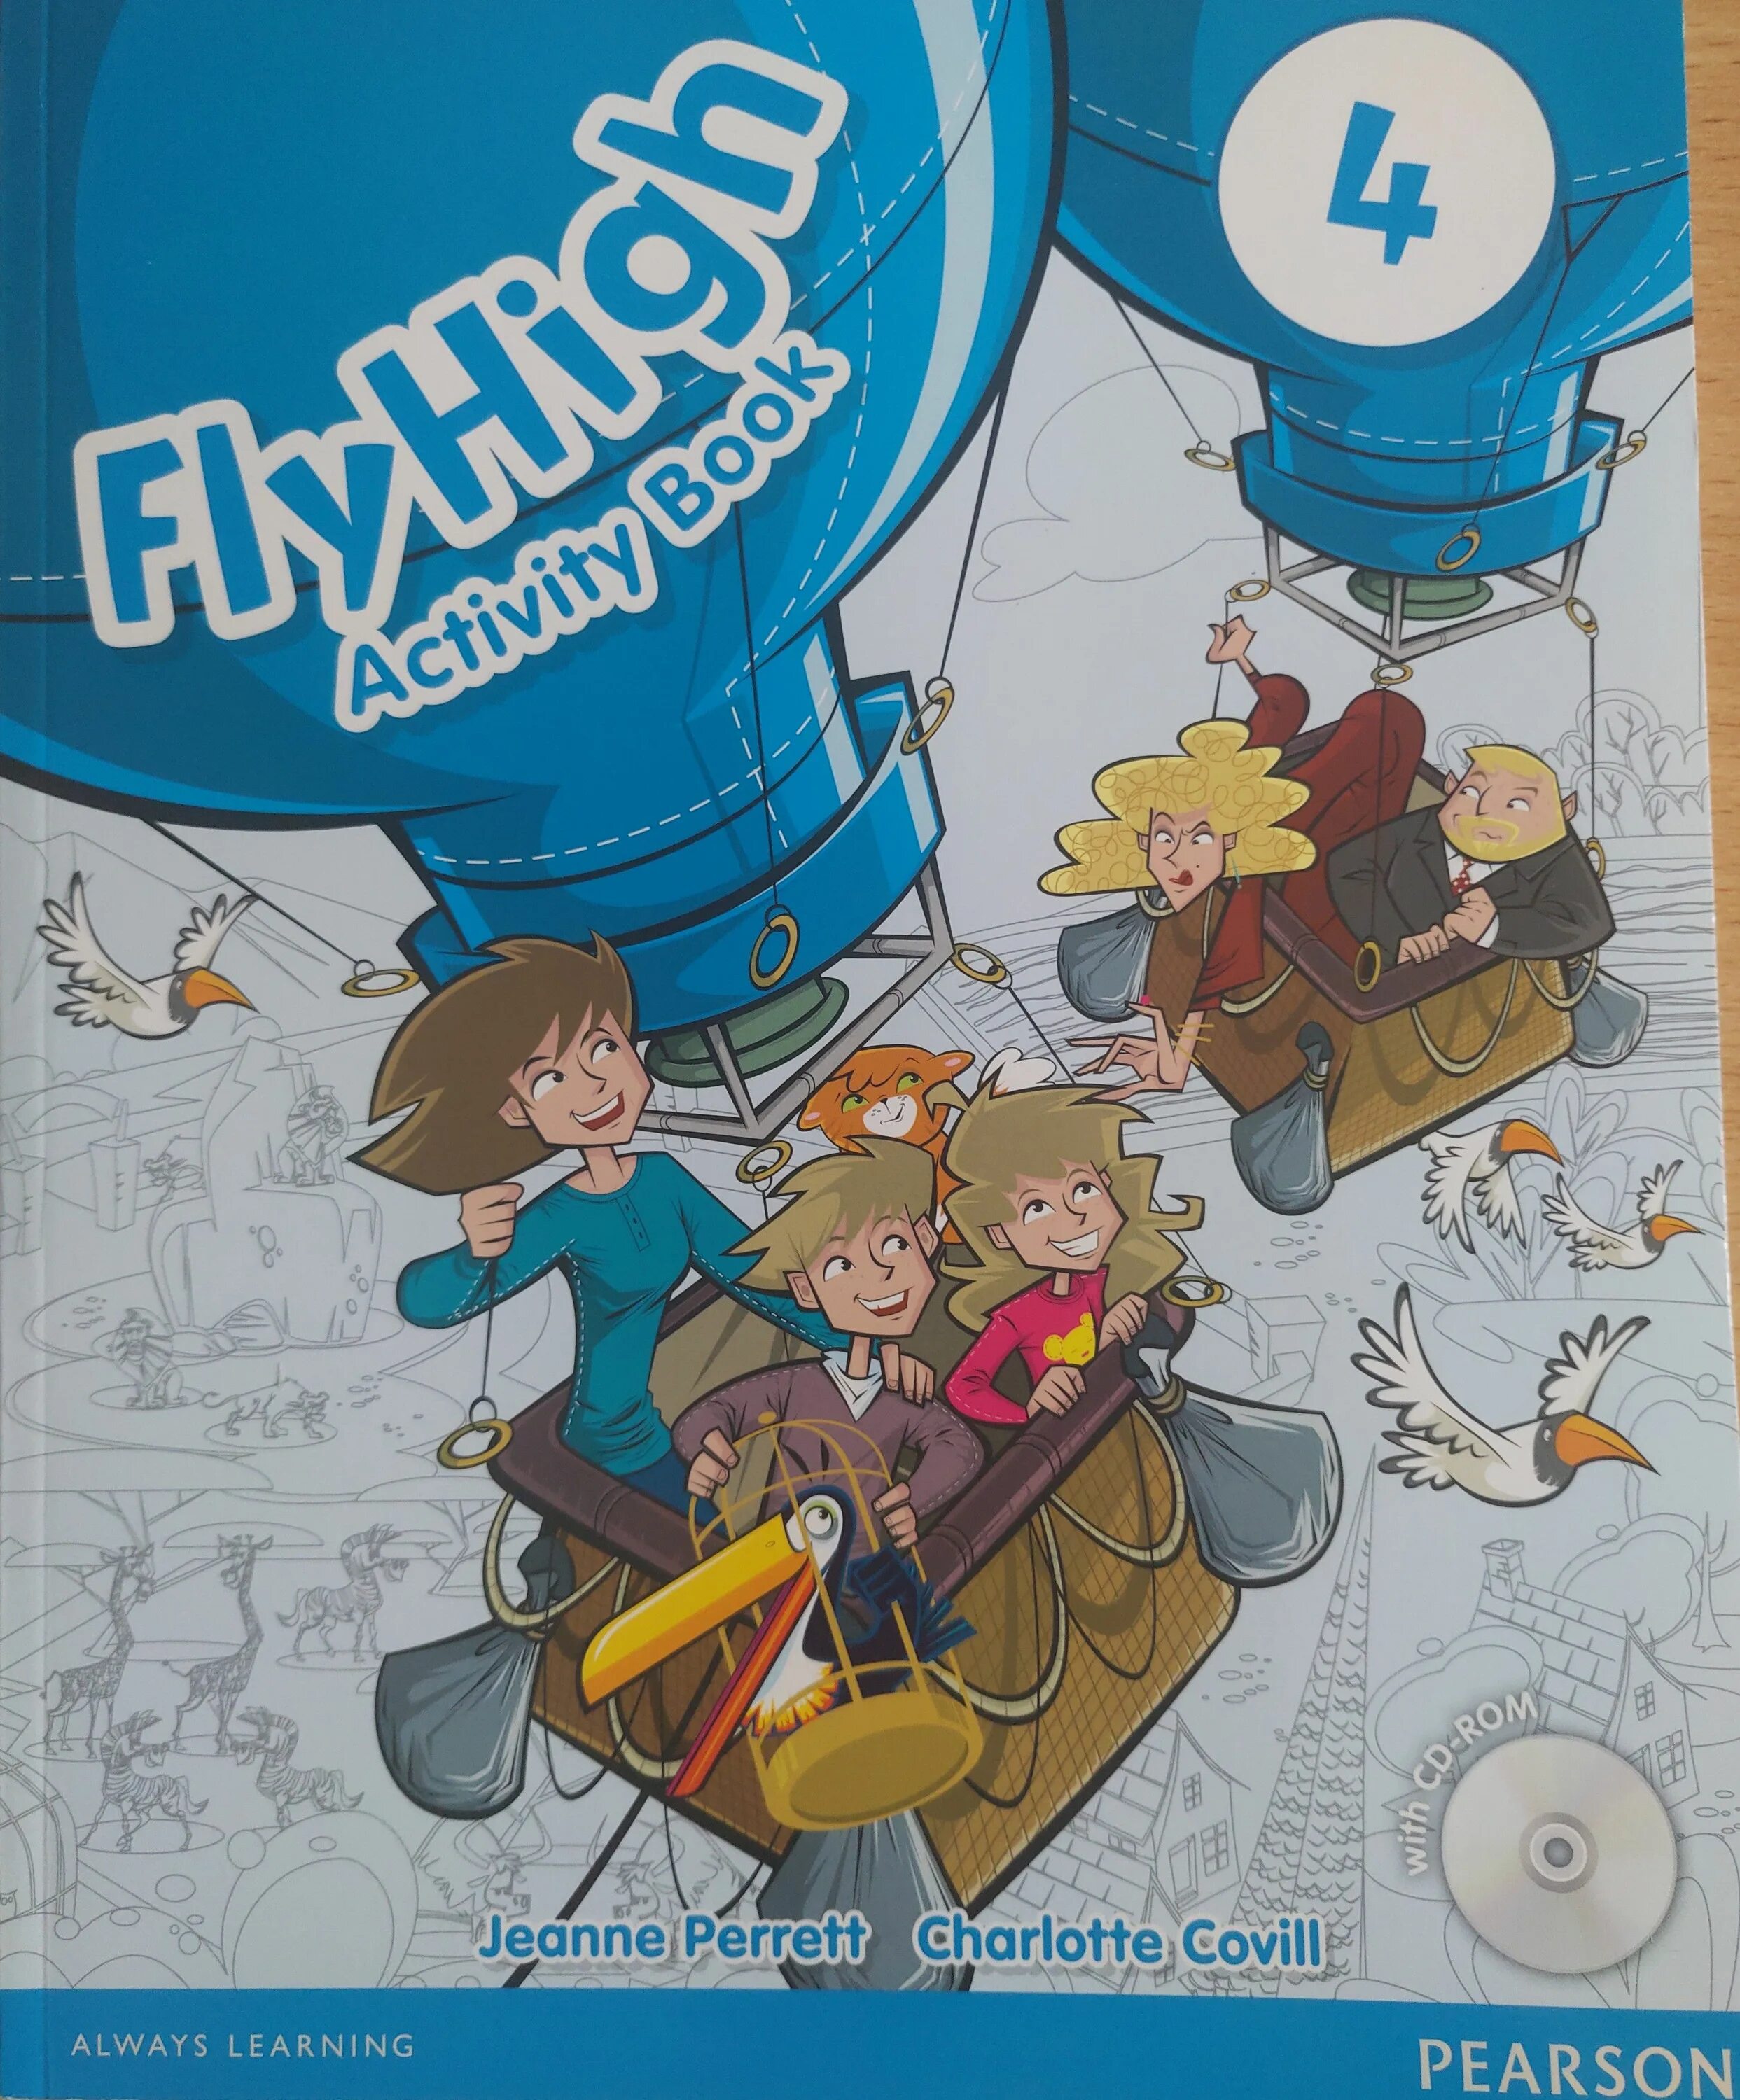 Fly high review. Fly High 4. Fly High activity book. Flyhigh activity book 4 решебник. Fly High 4 activity book.